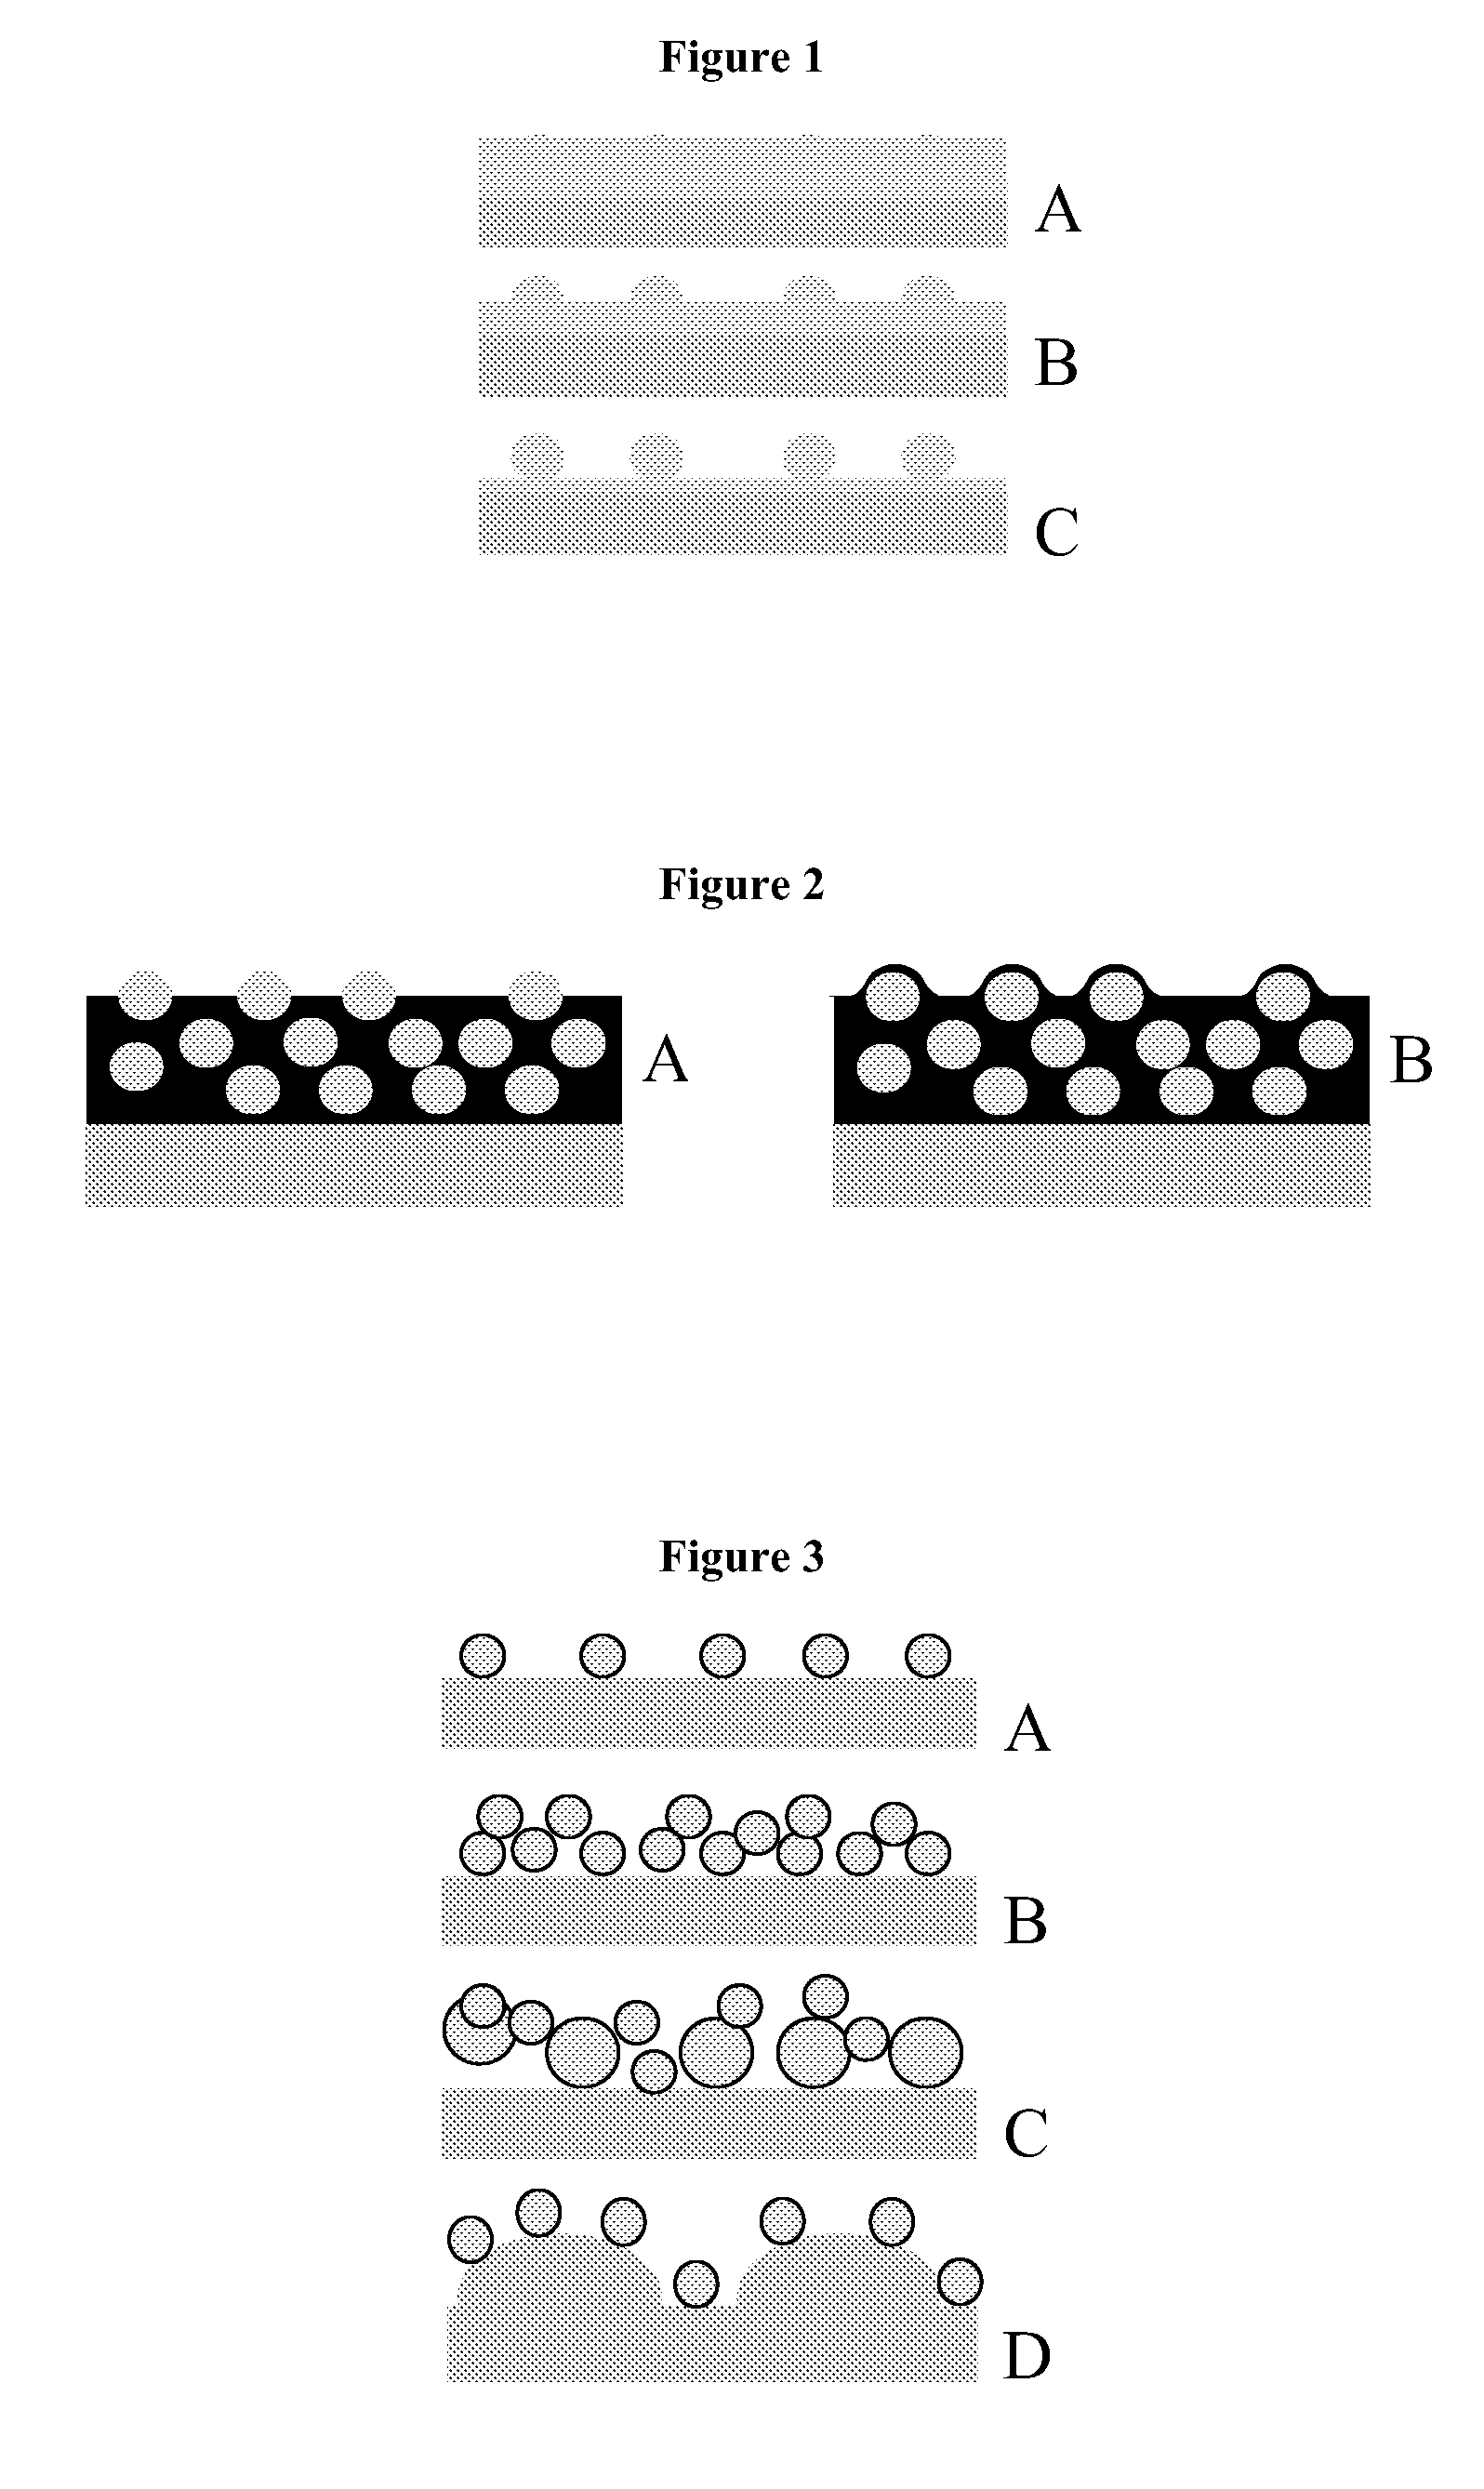 Article Coated With an Ultra High Hydrophobic Film and Process For Obtaining Same